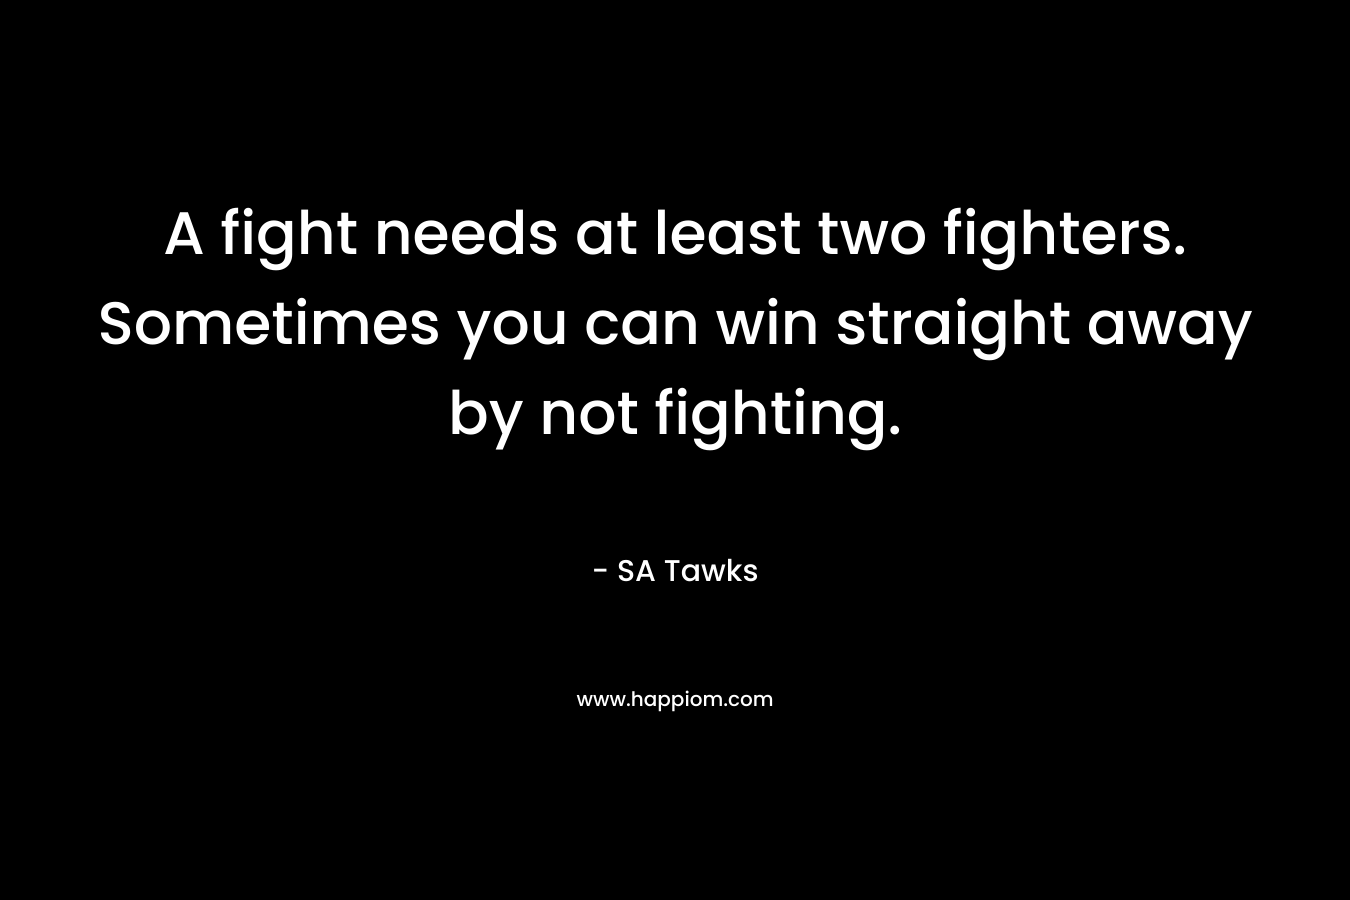 A fight needs at least two fighters. Sometimes you can win straight away by not fighting.